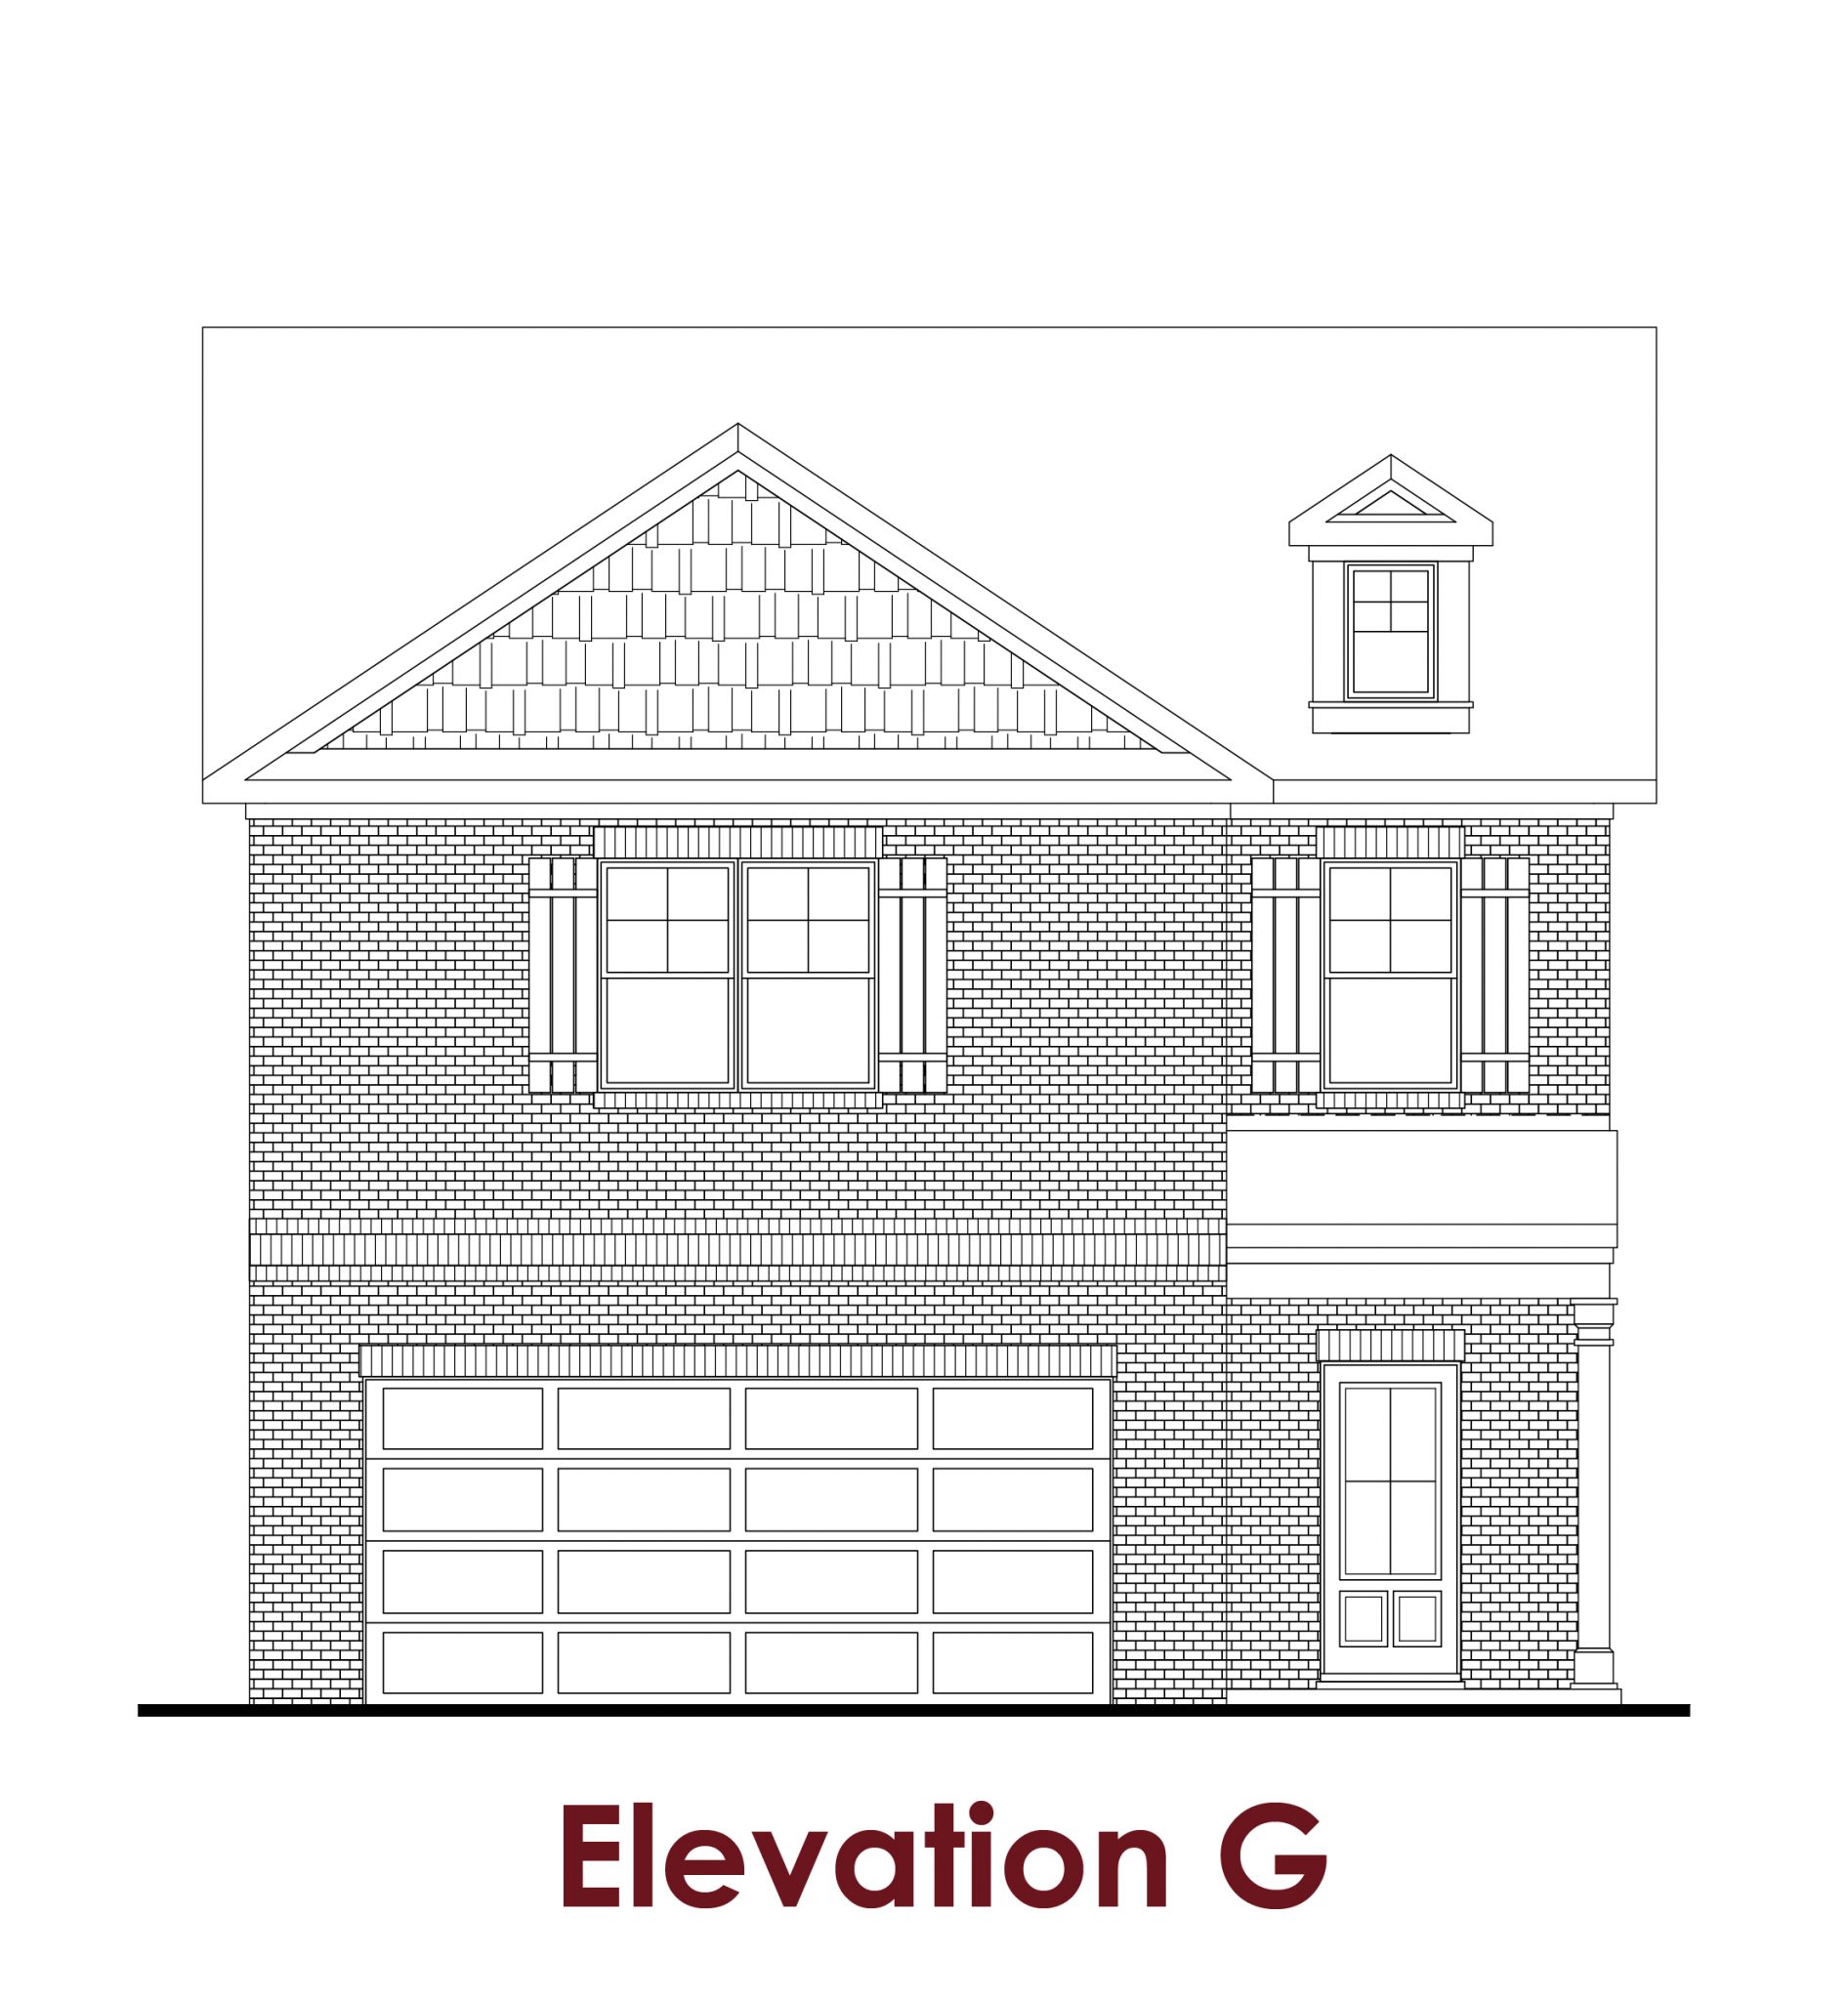 Mayfield elevations Image